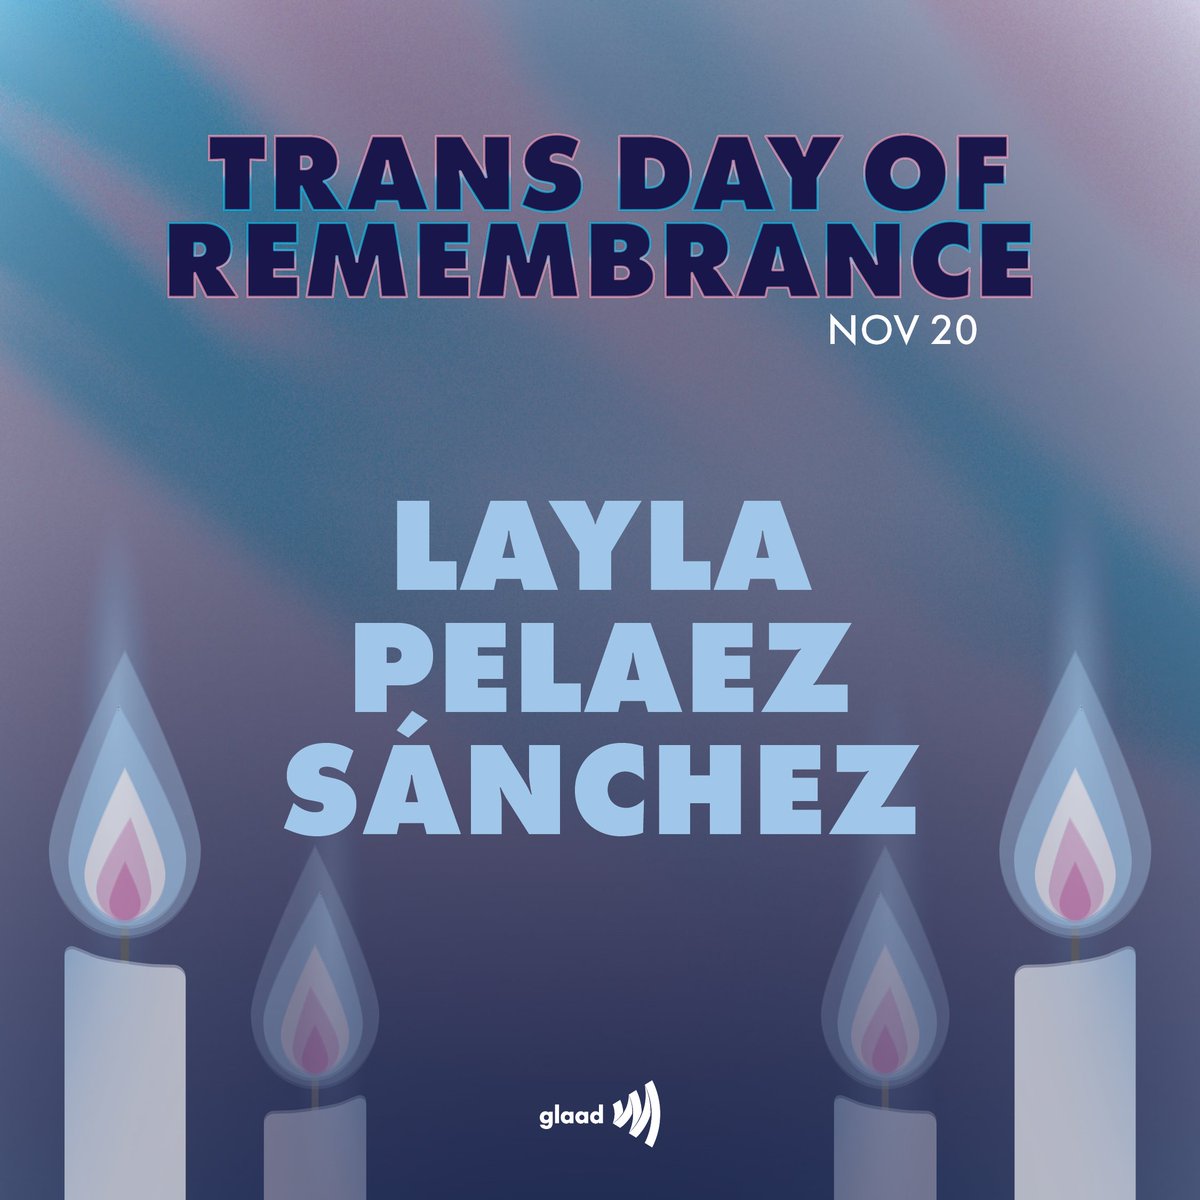 Layla Pelaez Sánchez, a transgender woman, was killed in Puerto Rico on April 21, 2020. She was killed alongside Serena Angelique Velásquez Ramos. She was 21 years old.